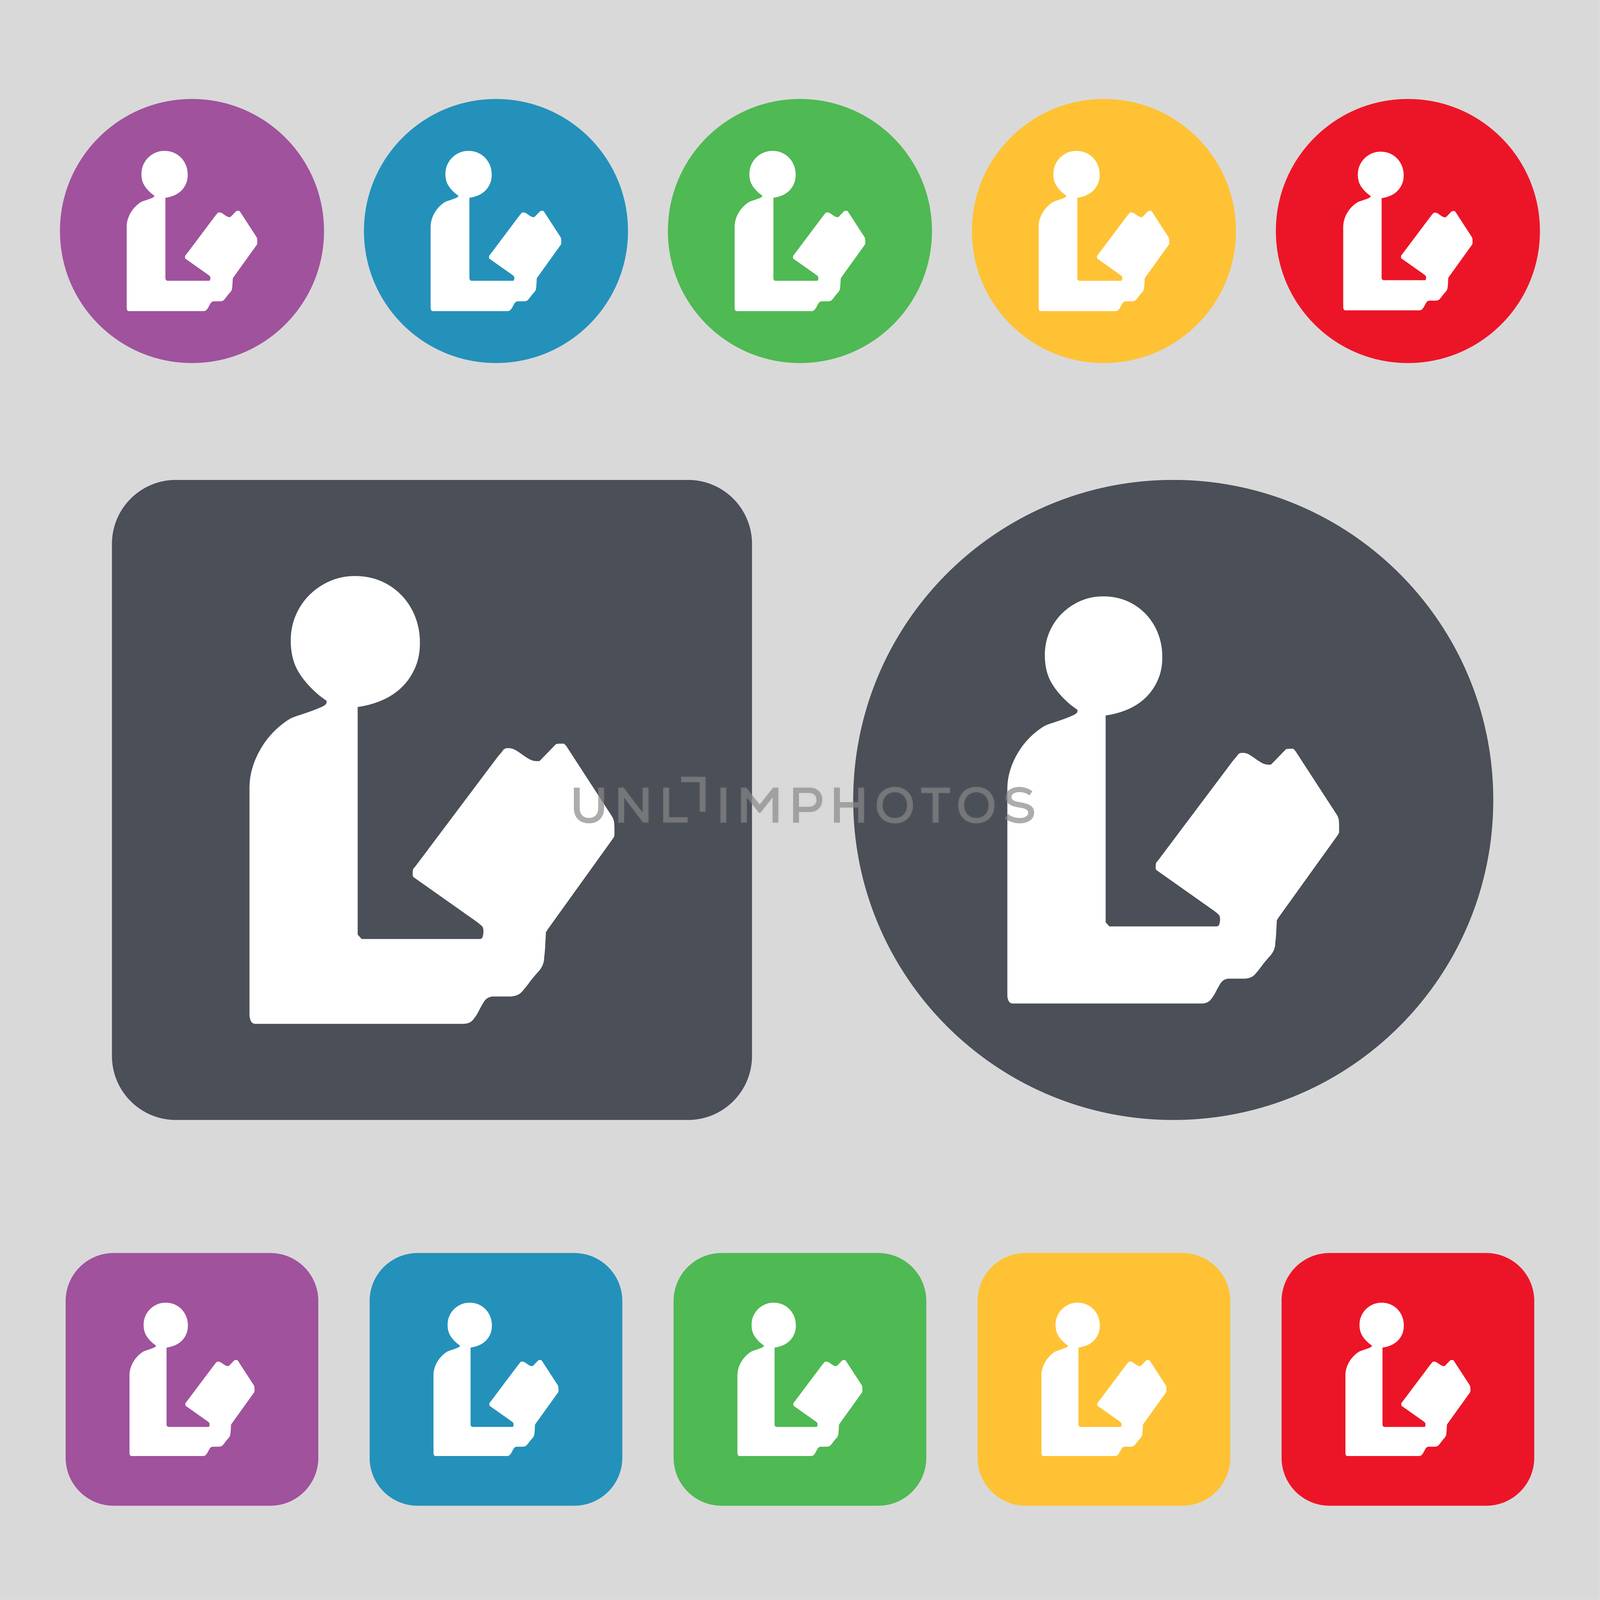 read a book icon sign. A set of 12 colored buttons. Flat design. illustration